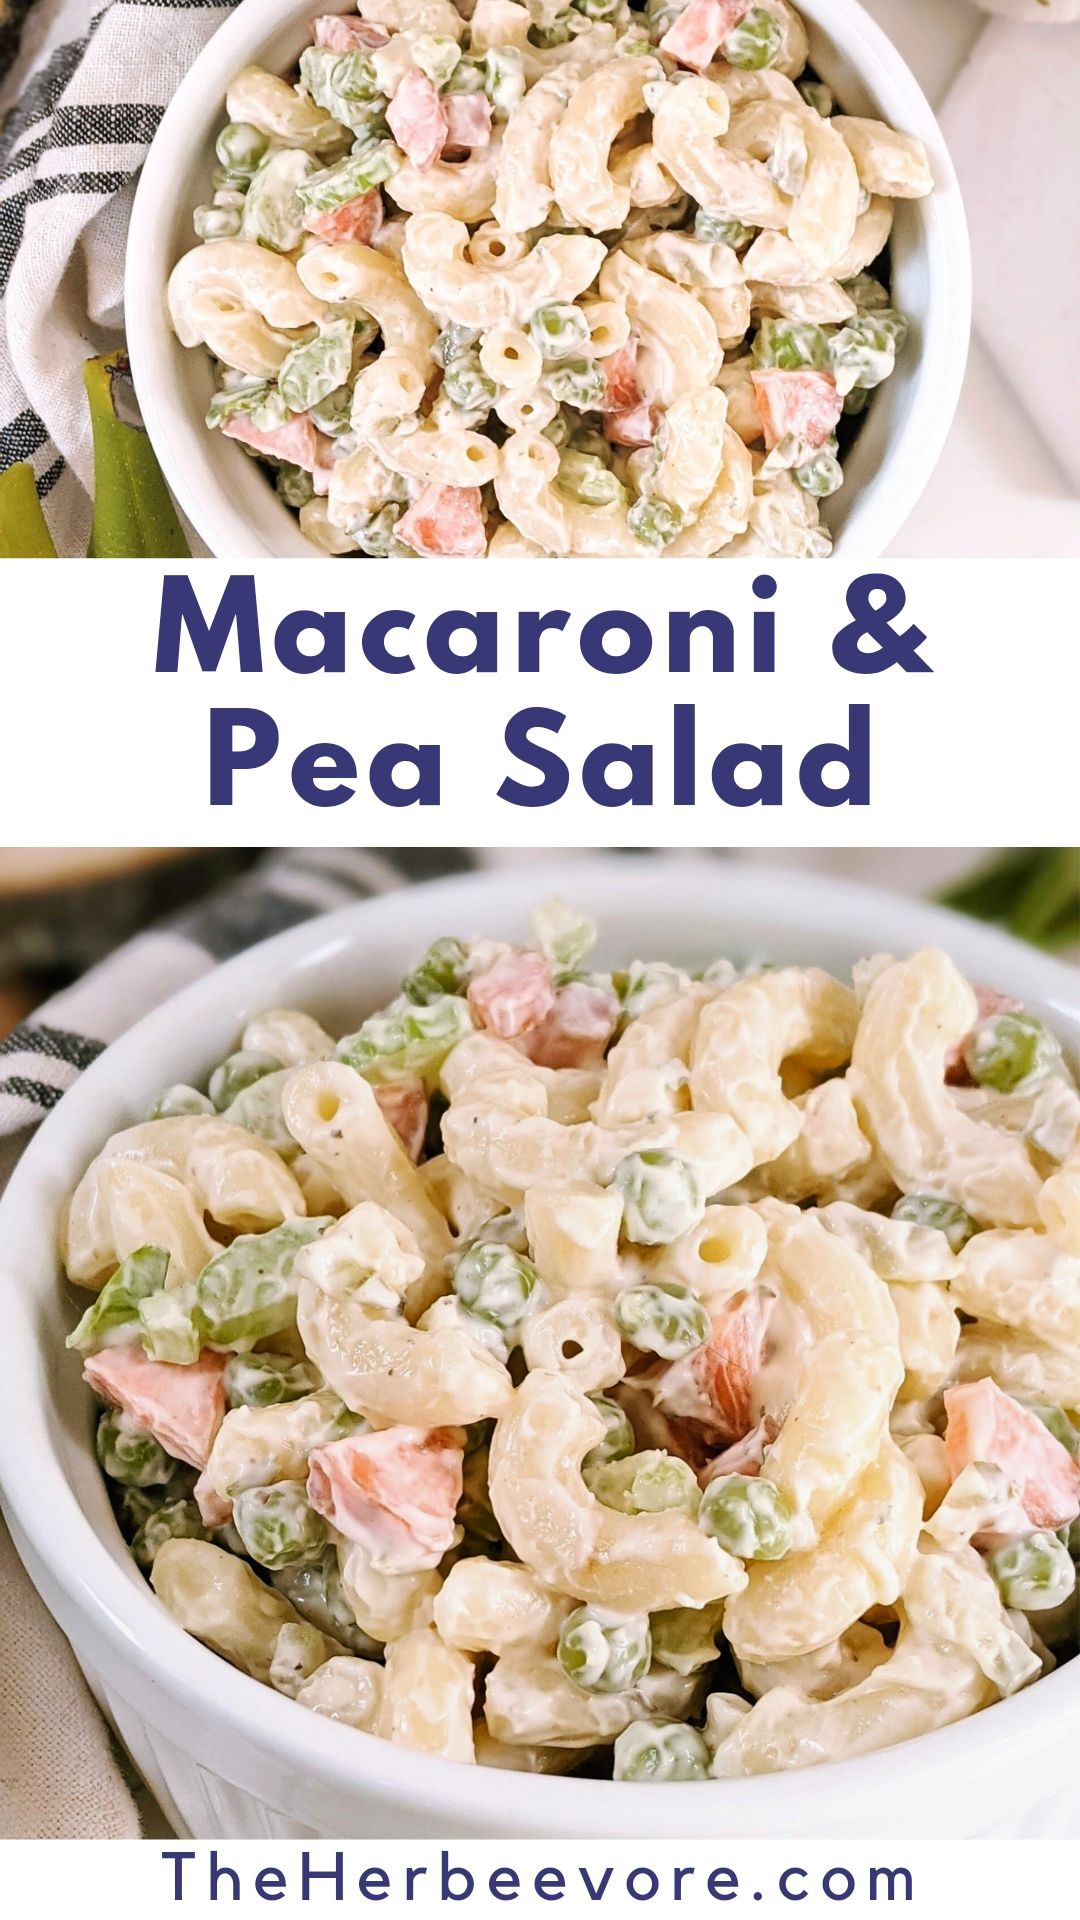 macaroni salad recipe with peas mayonnaise carrots bell pepper sweet relish and cheddar cheese